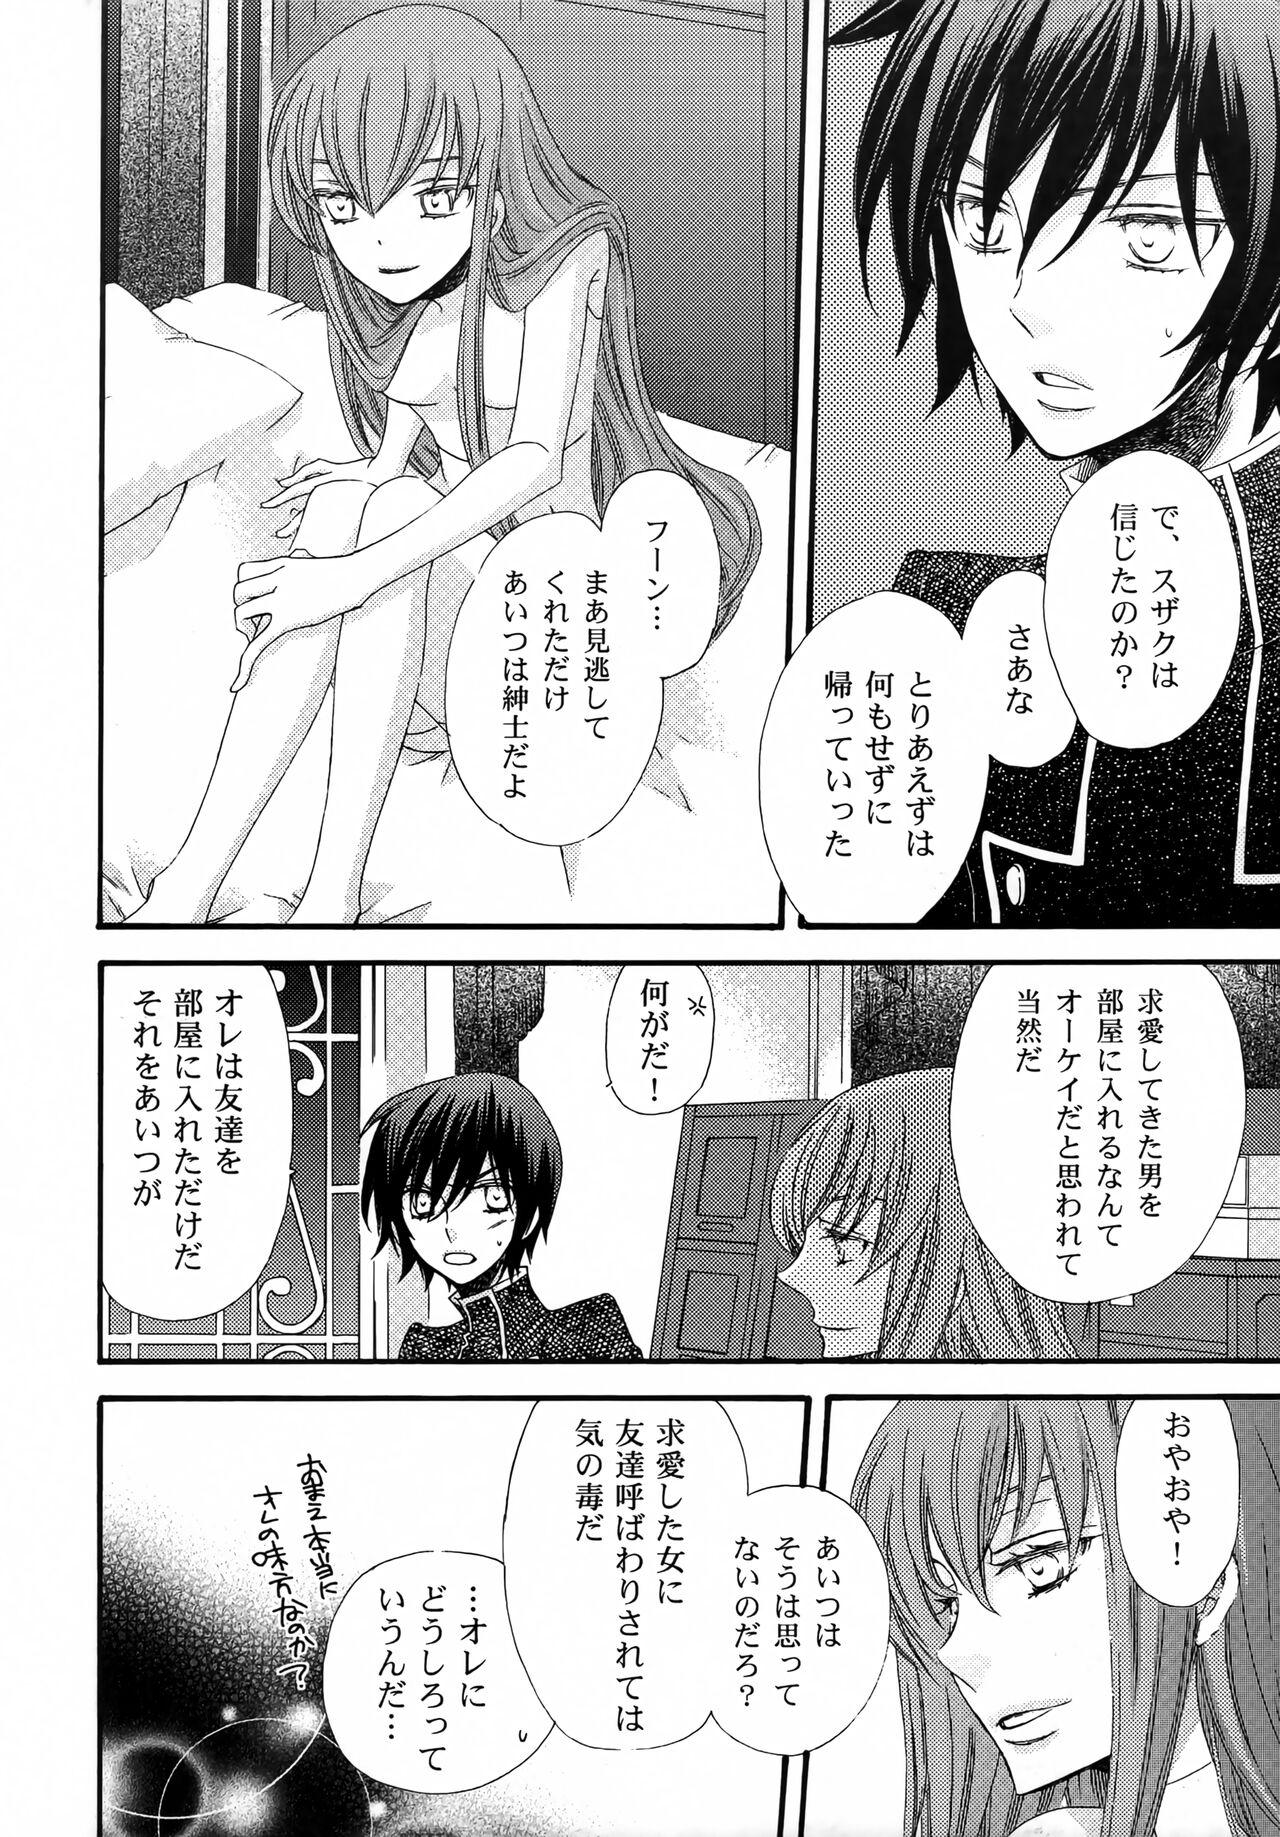 Maid Miriam - Code geass Gaystraight - Page 5